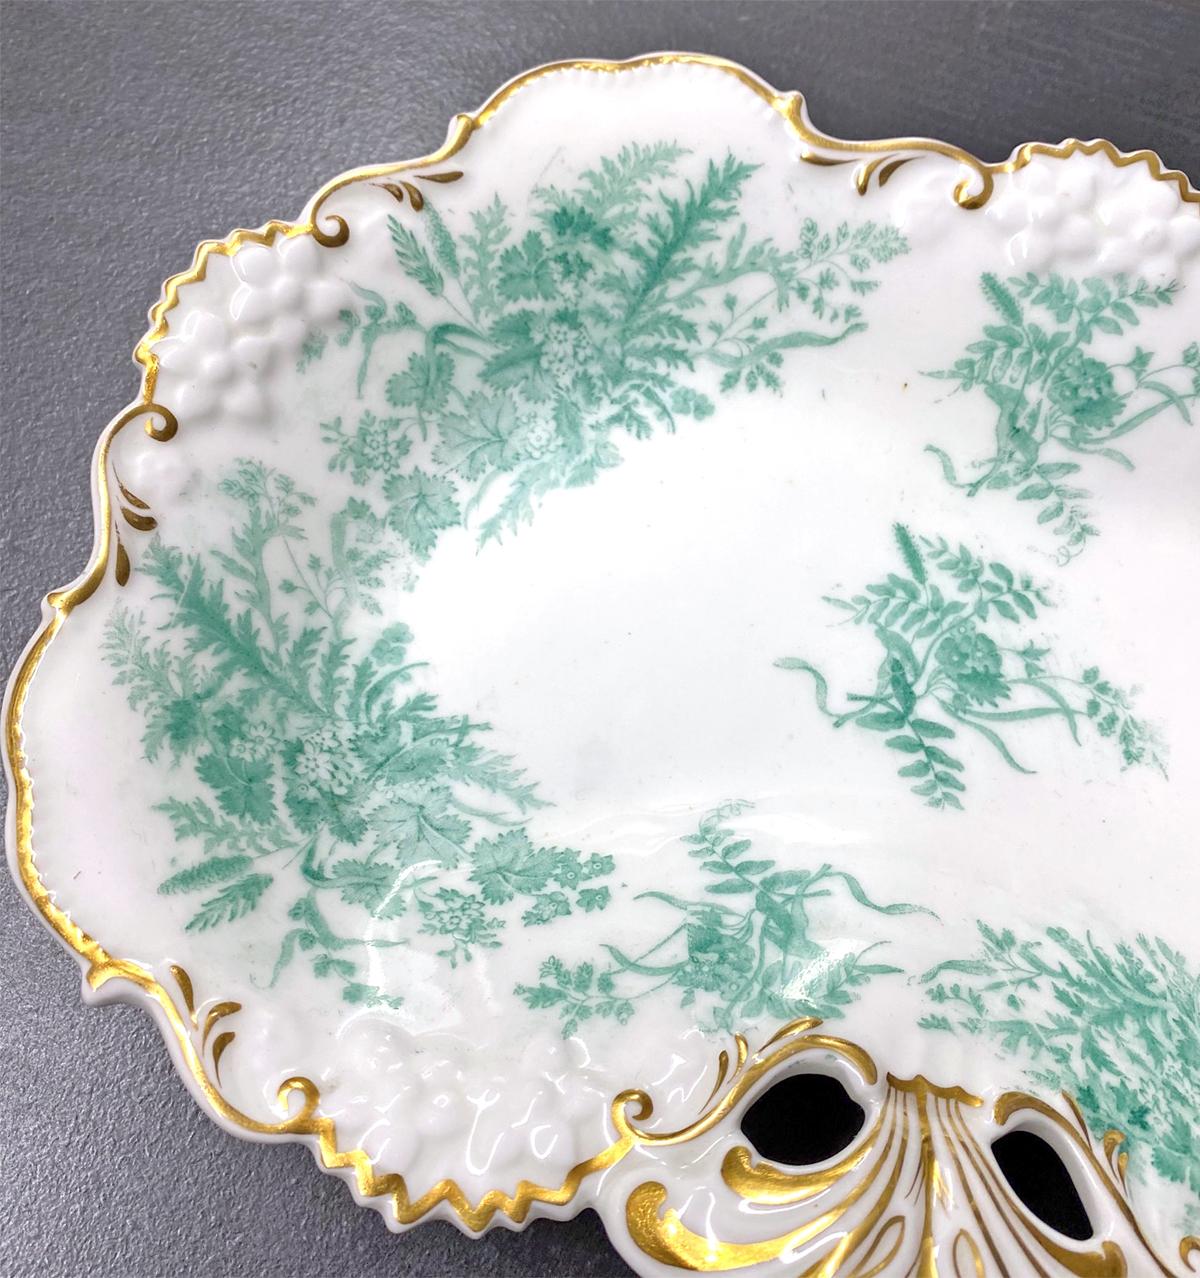  13 Davenport 19th c.  Dessert Set W/ Aesthetic Movement Teal Blue Fern Subjects In Good Condition For Sale In Great Barrington, MA